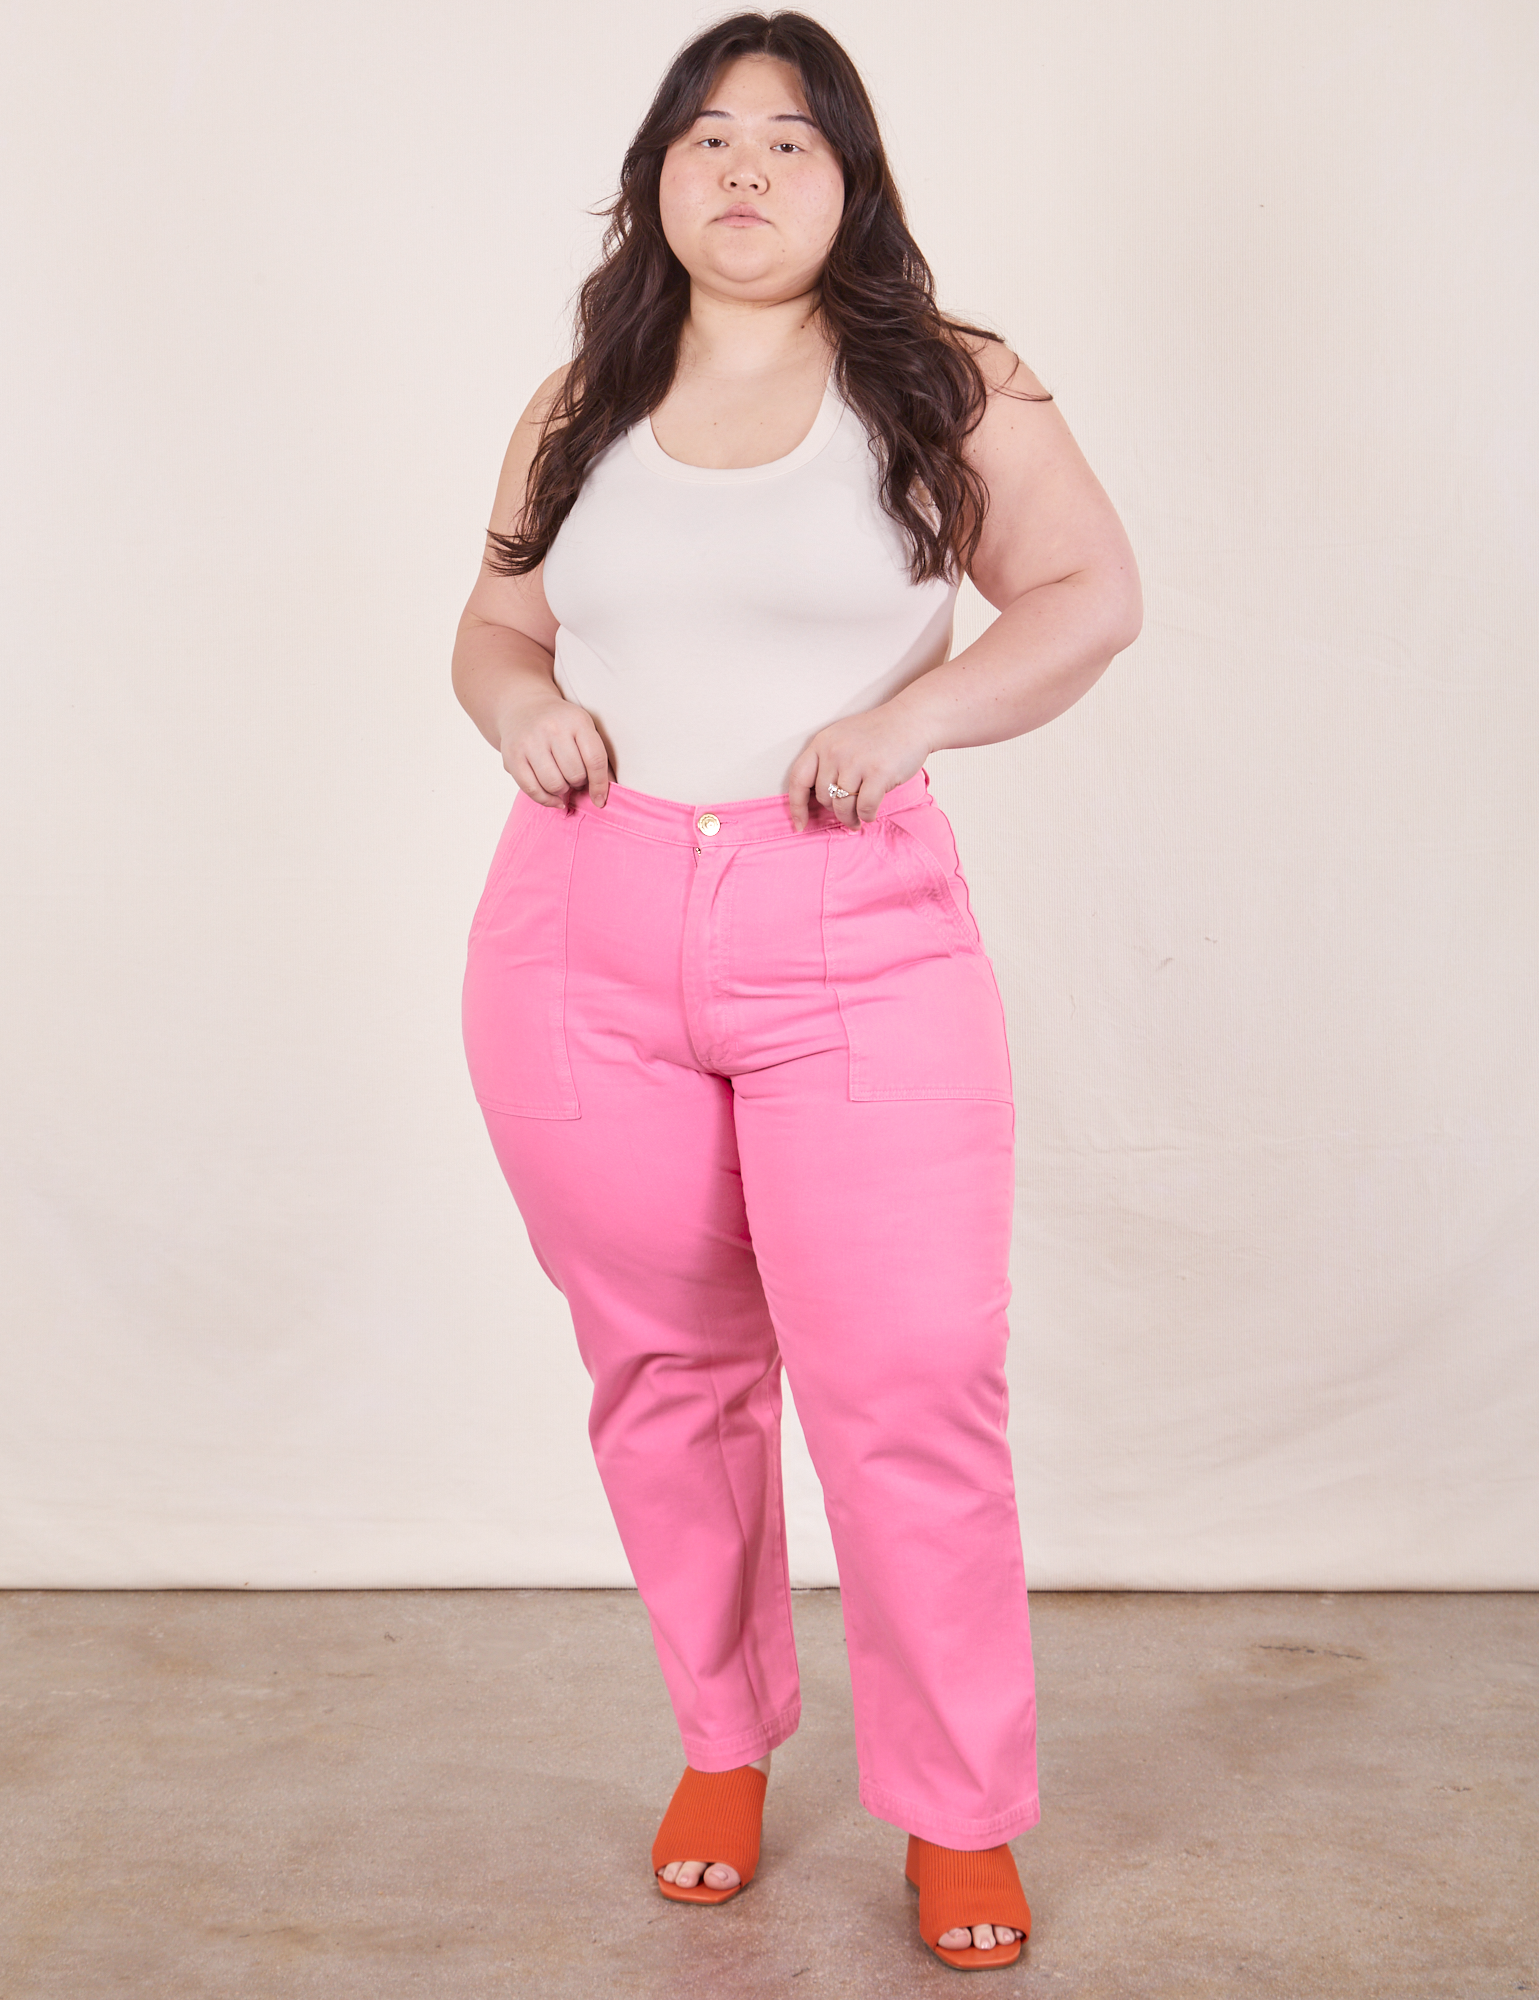 Ashley is 5&#39;7&quot; and wearing 1XL Work Pants in Bubblegum Pink paired with Tank Top in vintage tee off-white